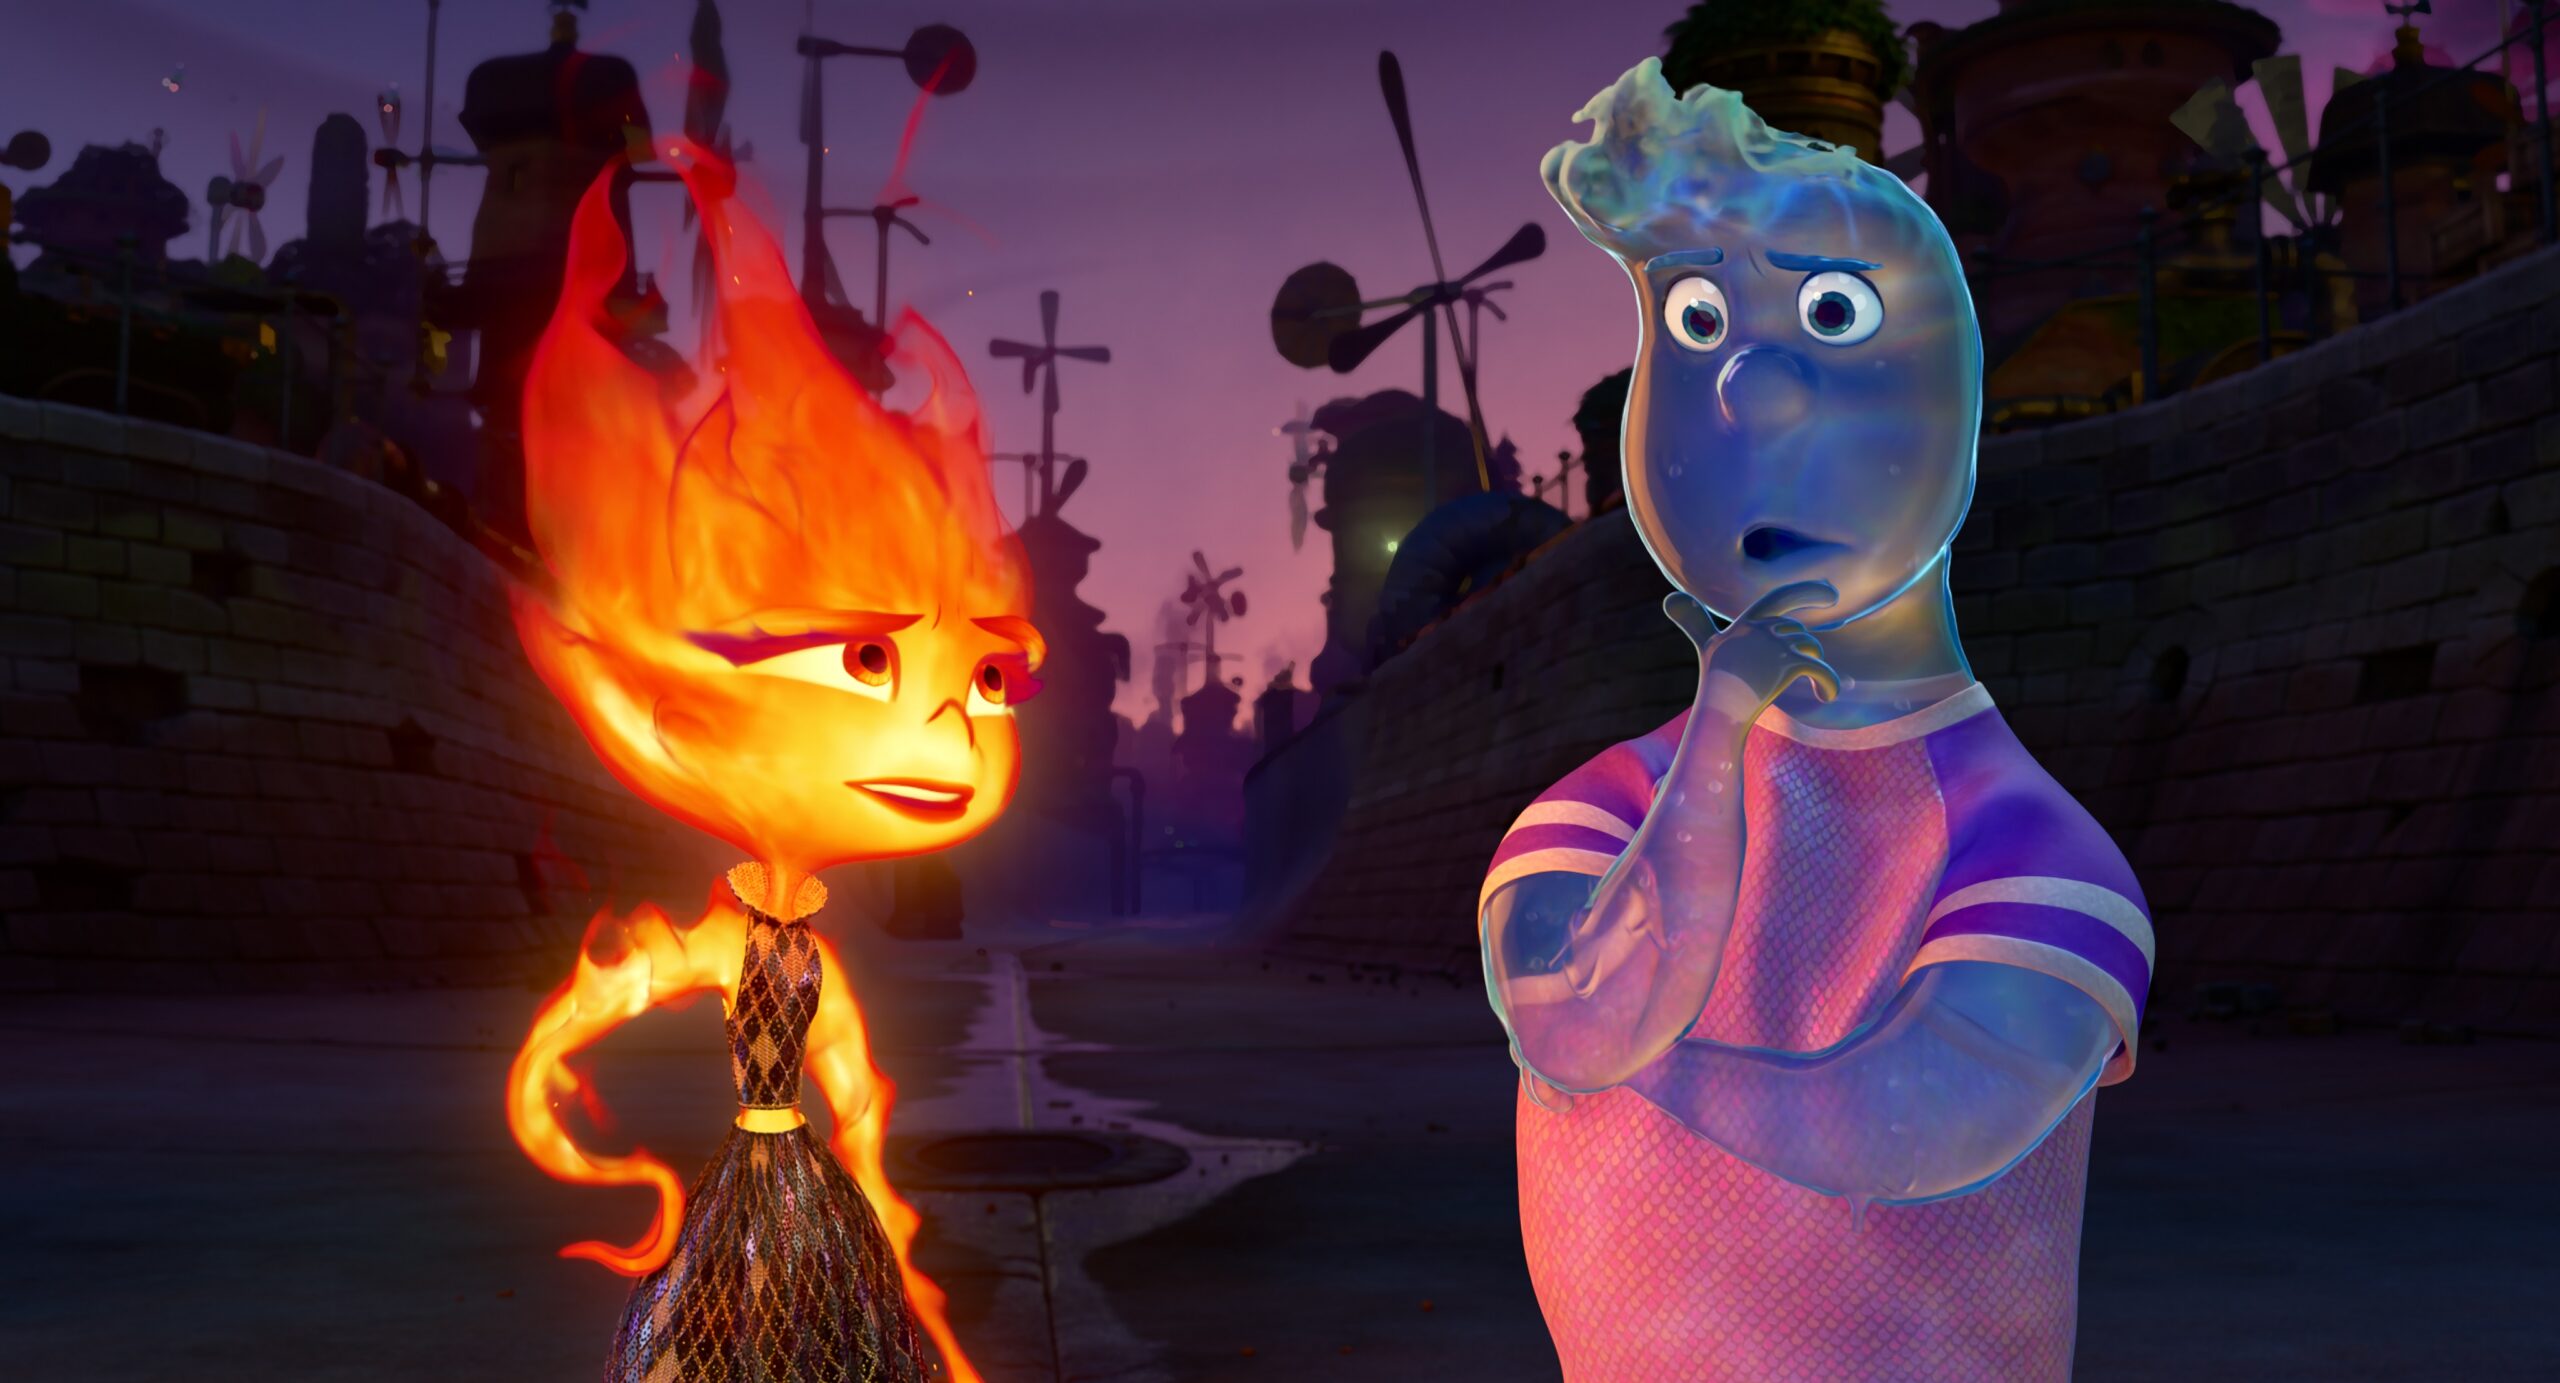 Ember (Leah Lewis) and Wade (Mamoudou Athie) in Disney and Pixar’s “Elemental.”